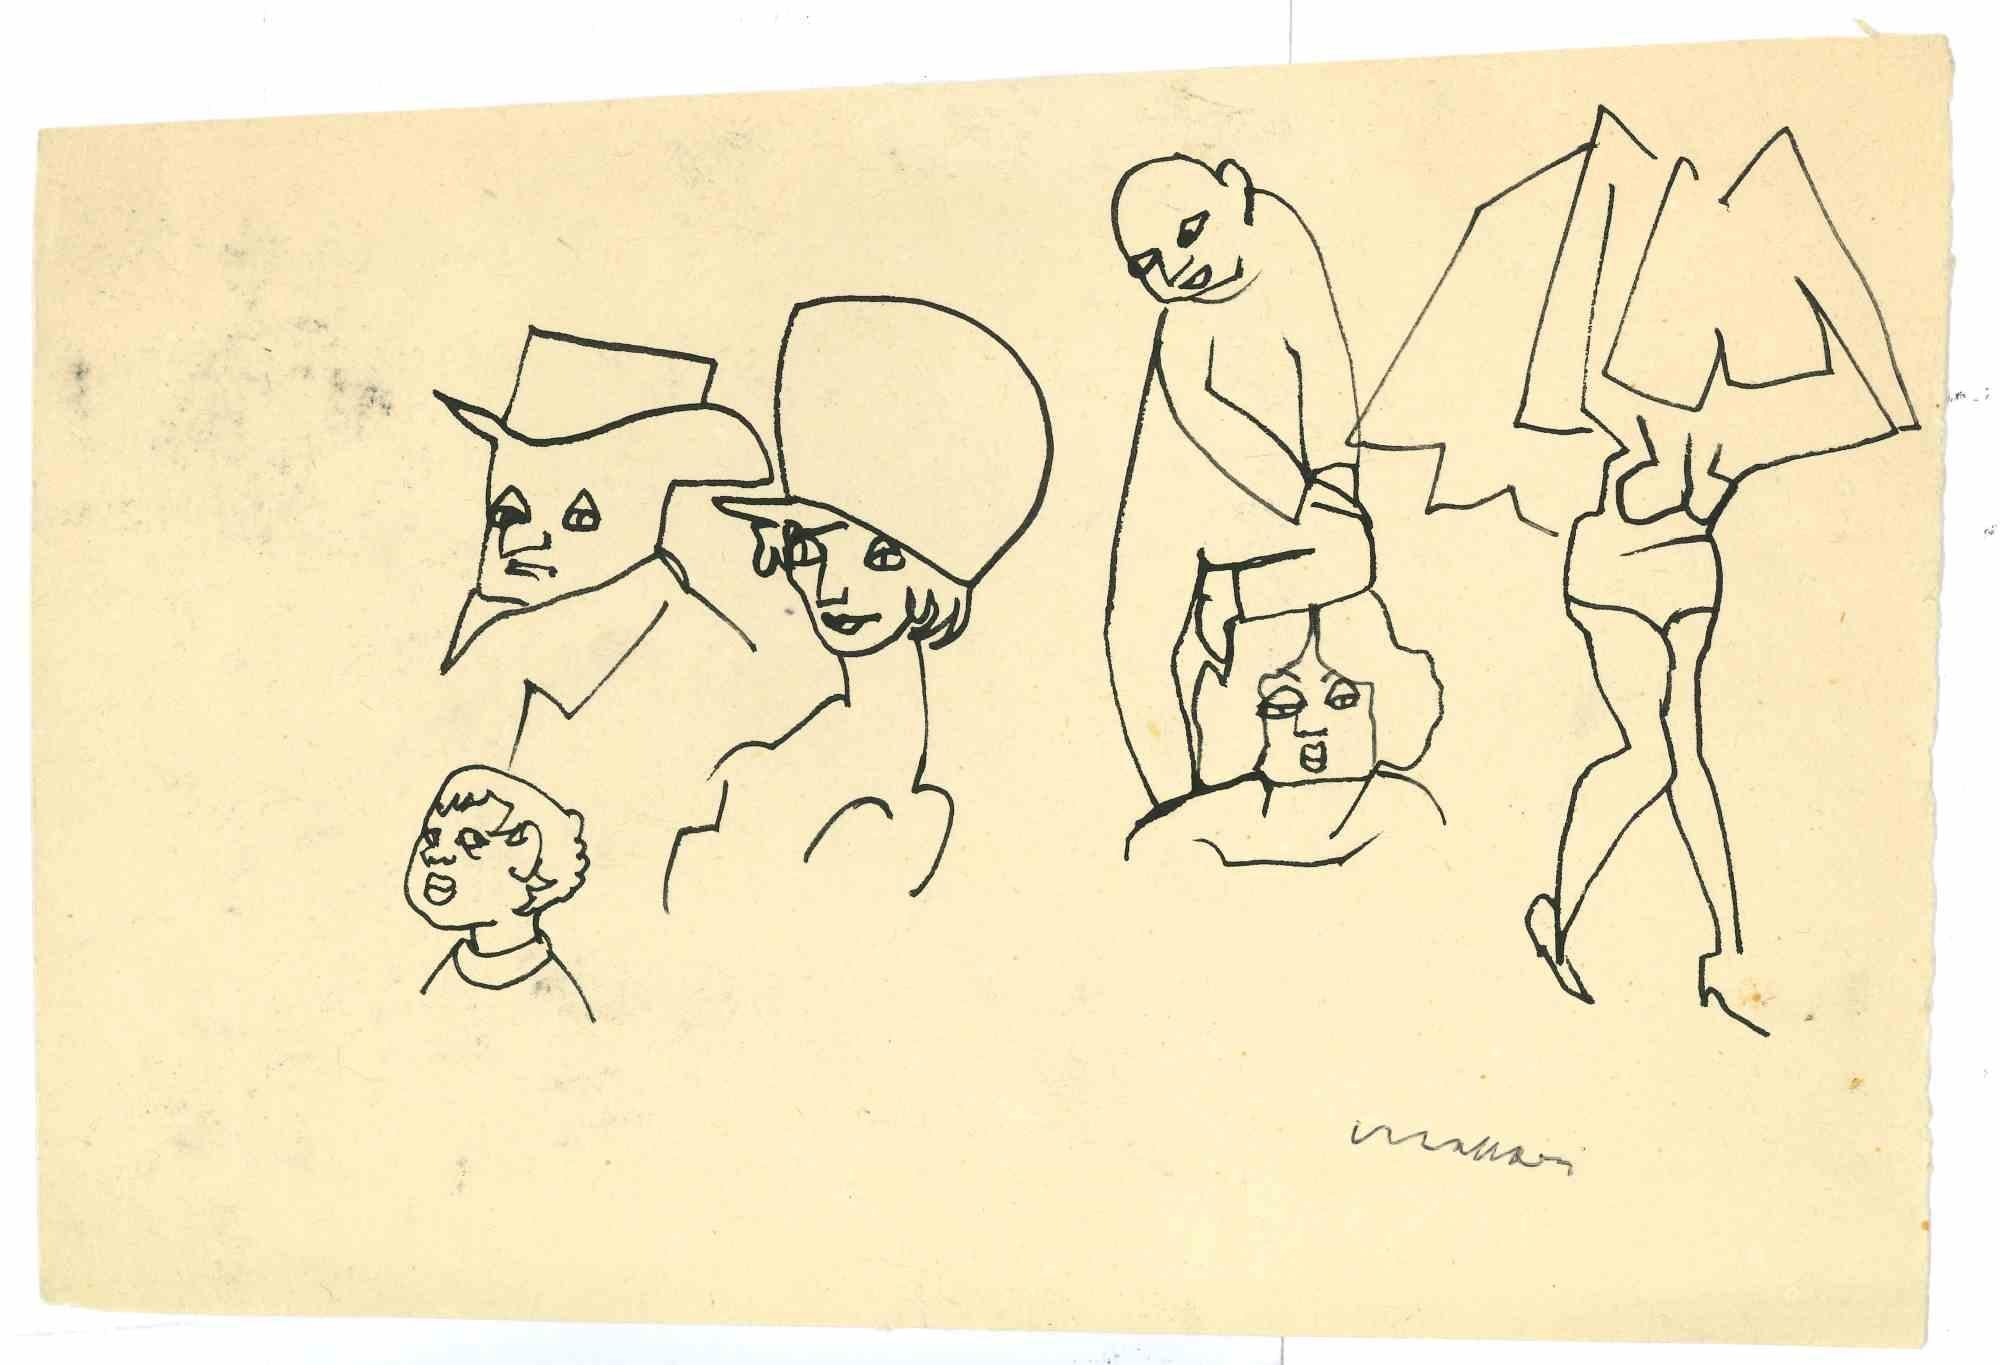 Jolly is a Pen Drawing realized by Mino Maccari  (1924-1989) in the 1930s.

Hand-signed on the lower.

Good condition.

Mino Maccari (Siena, 1924-Rome, June 16, 1989) was an Italian writer, painter, engraver and journalist, winner of the Feltrinelli